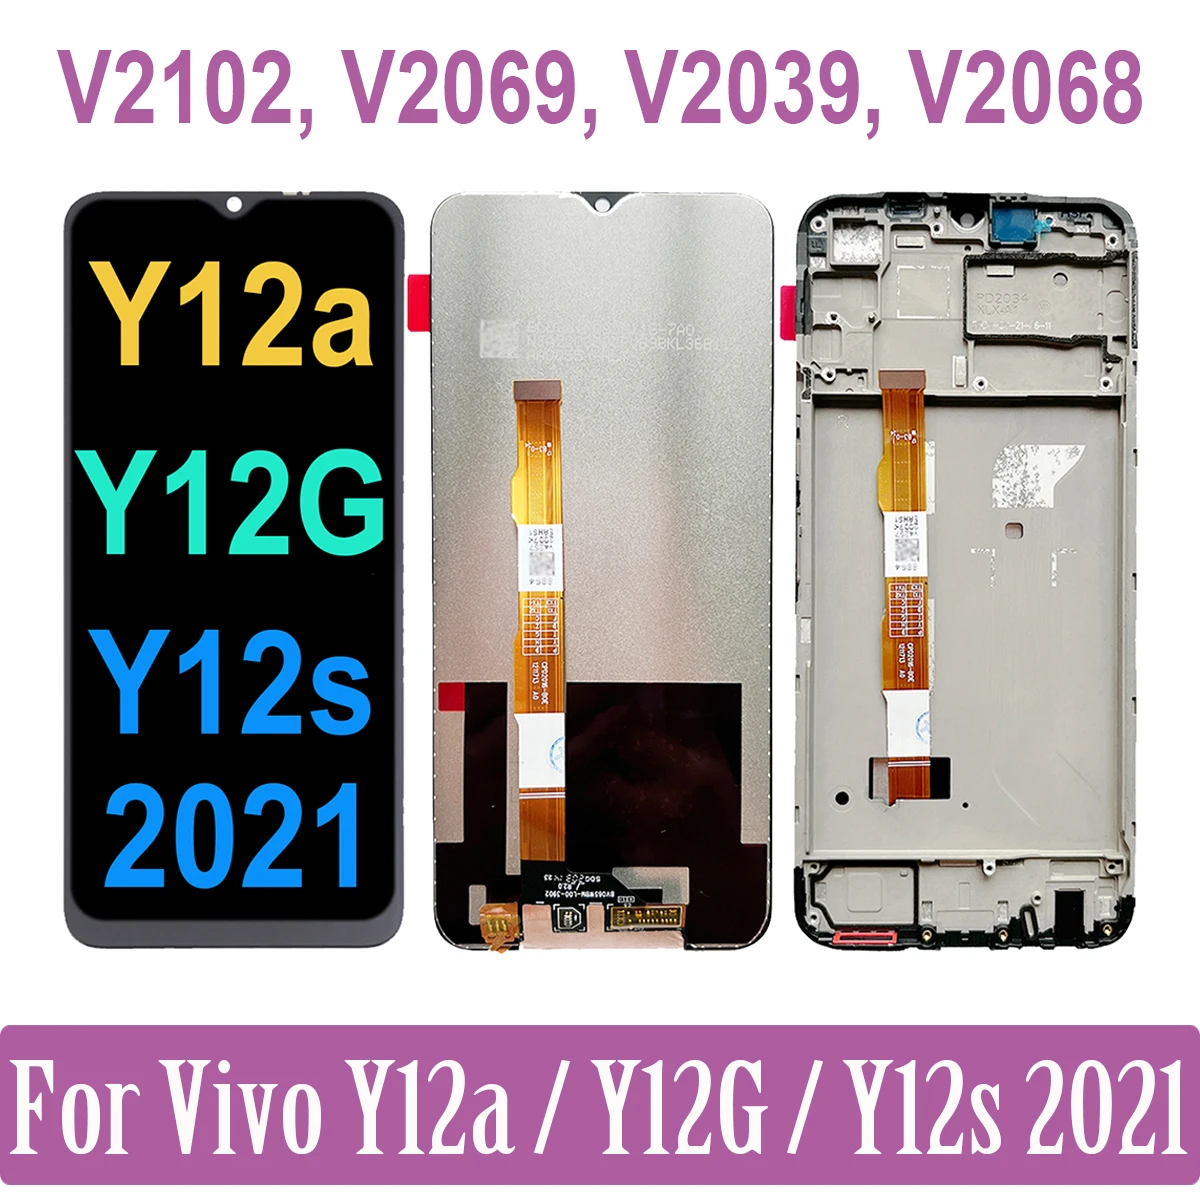 

6.51" Original For VIVO Y12a Y12G Y12S 2021 LCD Display Touch Screen Digitizer Assembly V2069 V2039 V2068 V2102 LCD Replacement